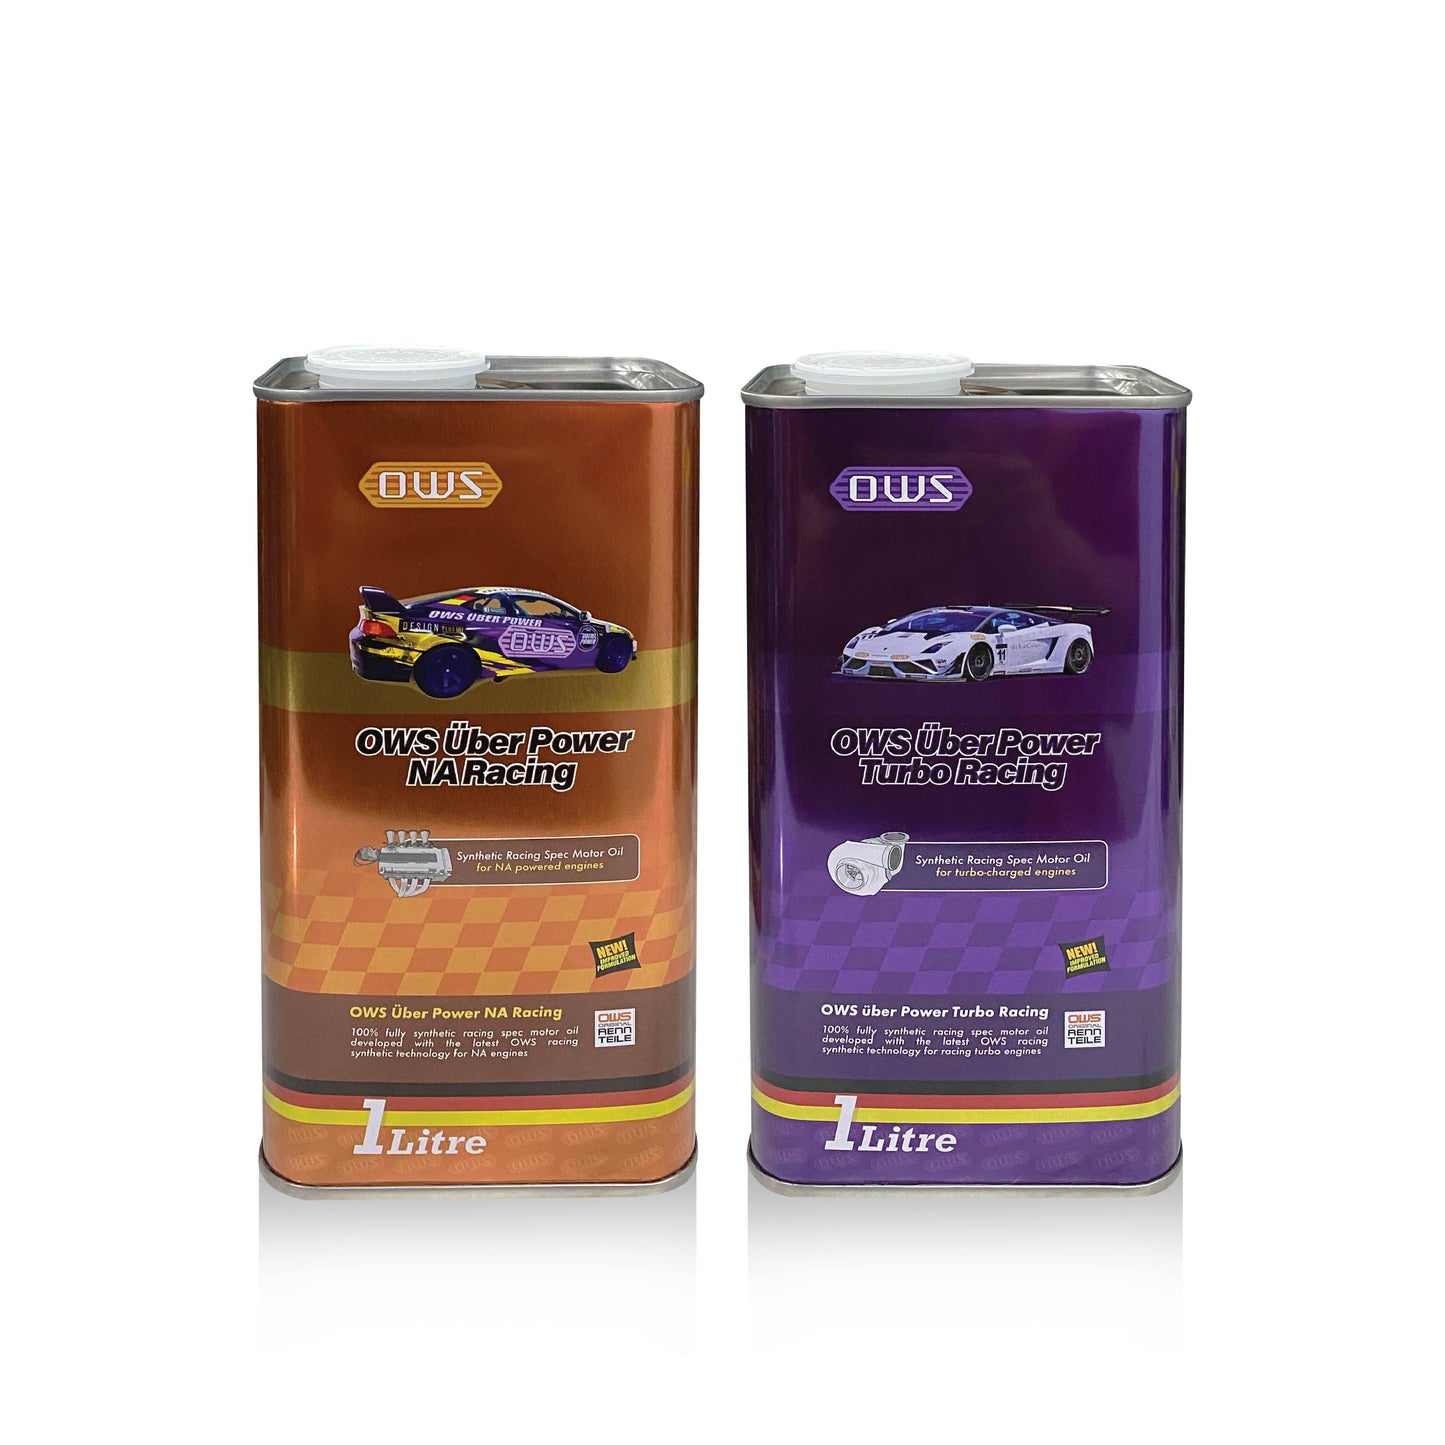 OWS Über Power Turbo Racing 1L